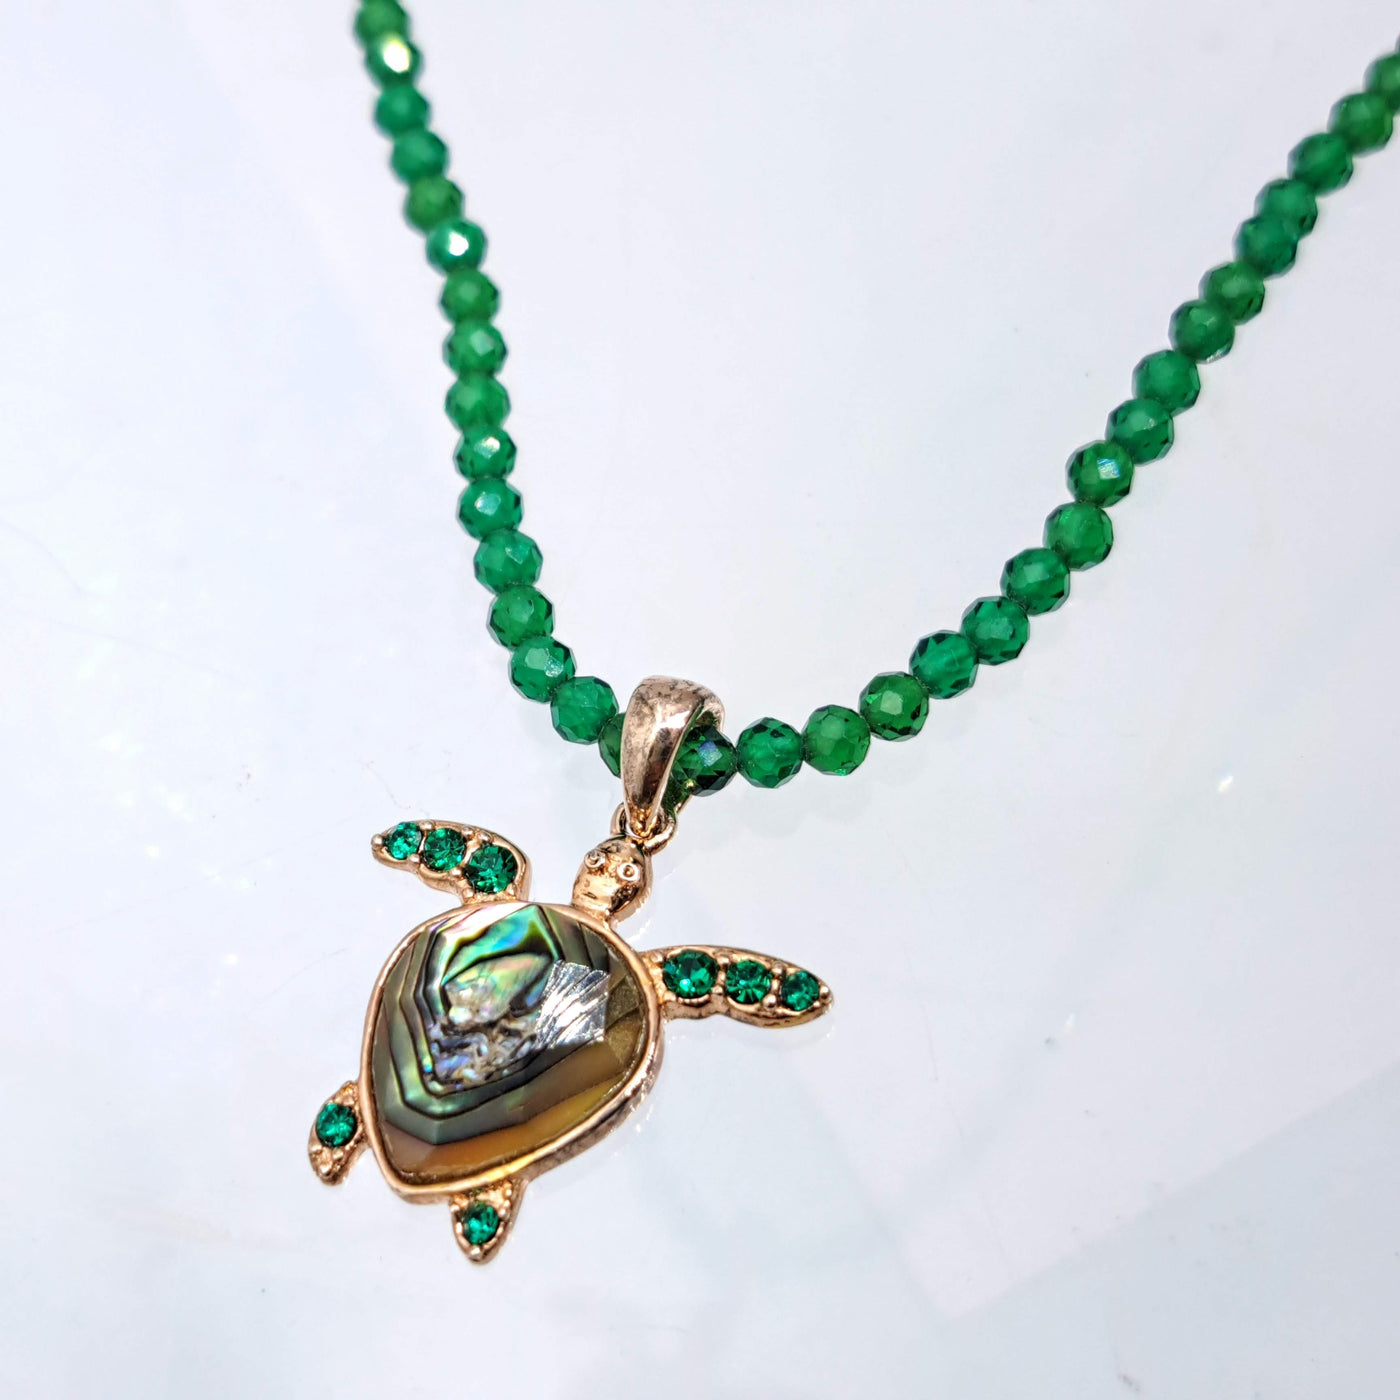 "Green Turtle Soup" 16-18" Necklace - Paua Shell, Green Onyx Crystal, Rose Gold Sterling